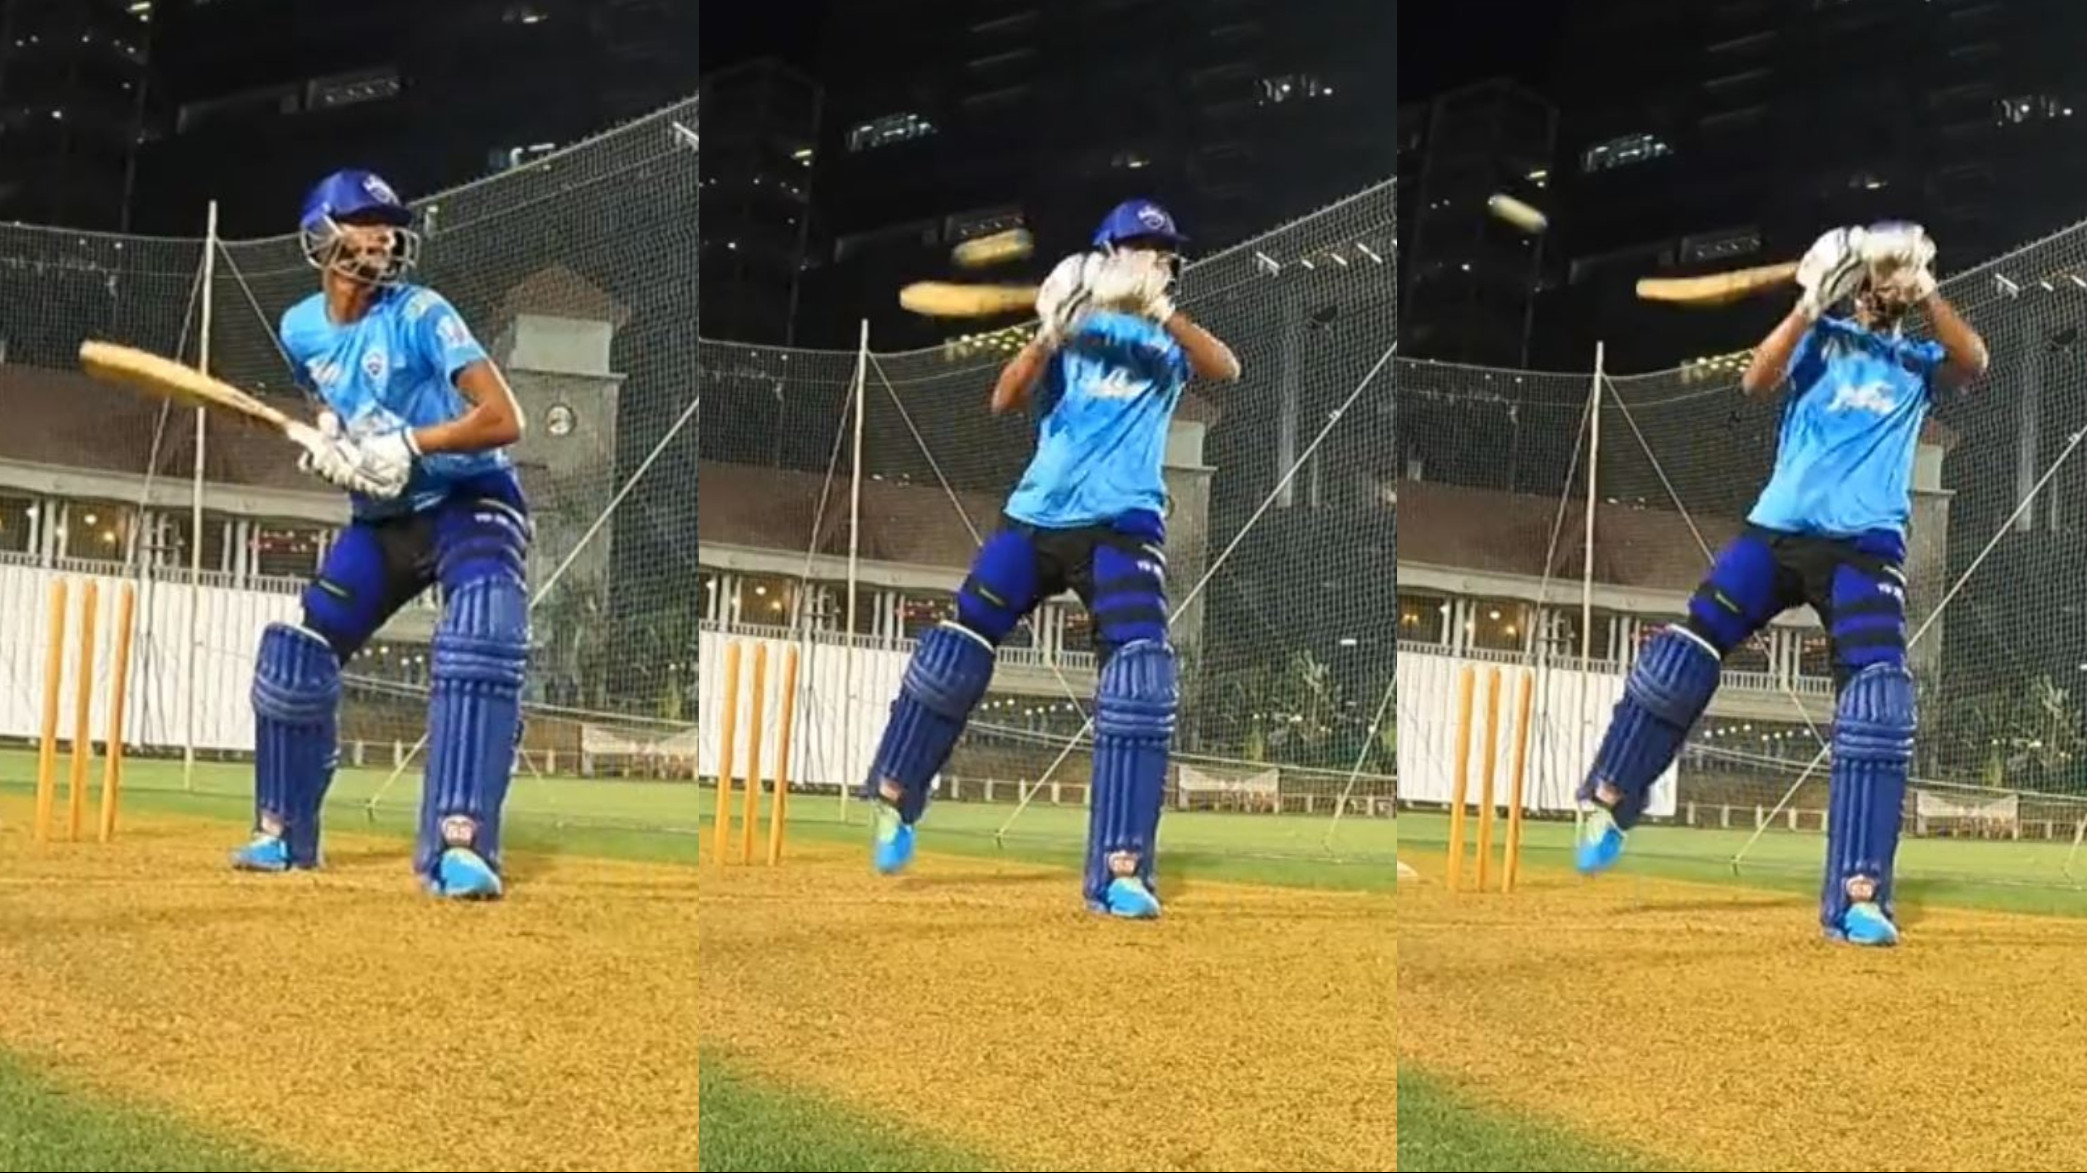 IPL 2022: WATCH- DC's Yash Dhull shows off his talent; plays a nonchalant no-look uppercut during nets